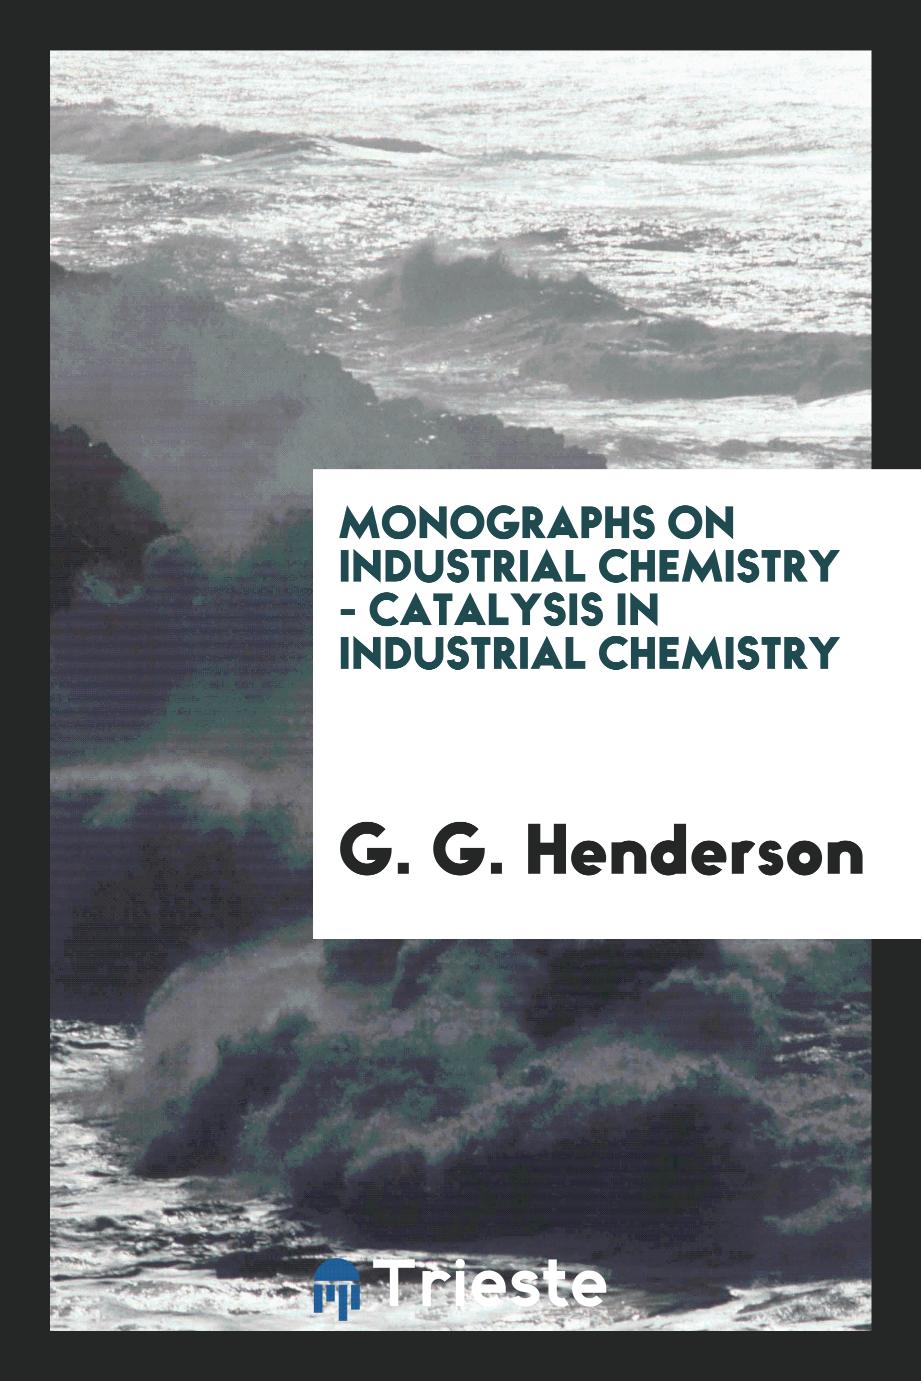 Monographs on industrial chemistry - Catalysis in industrial chemistry